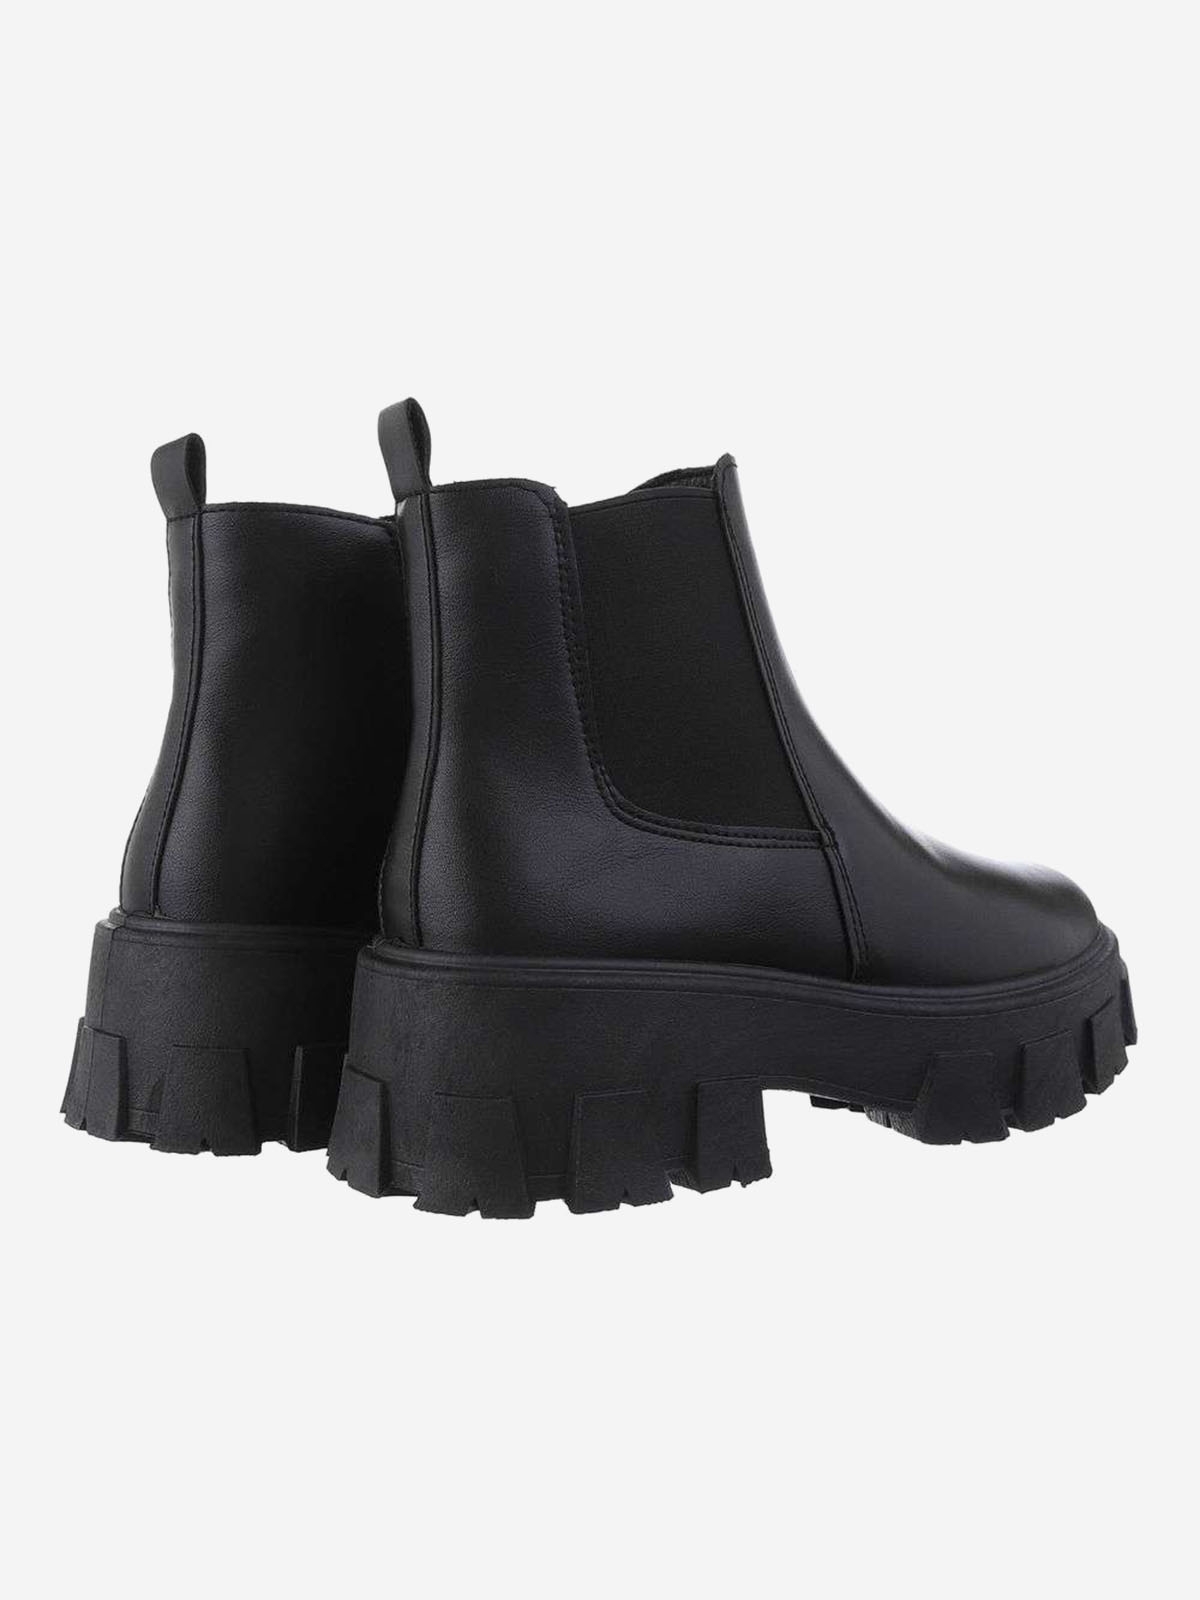 Women's ankle boots with platform in black